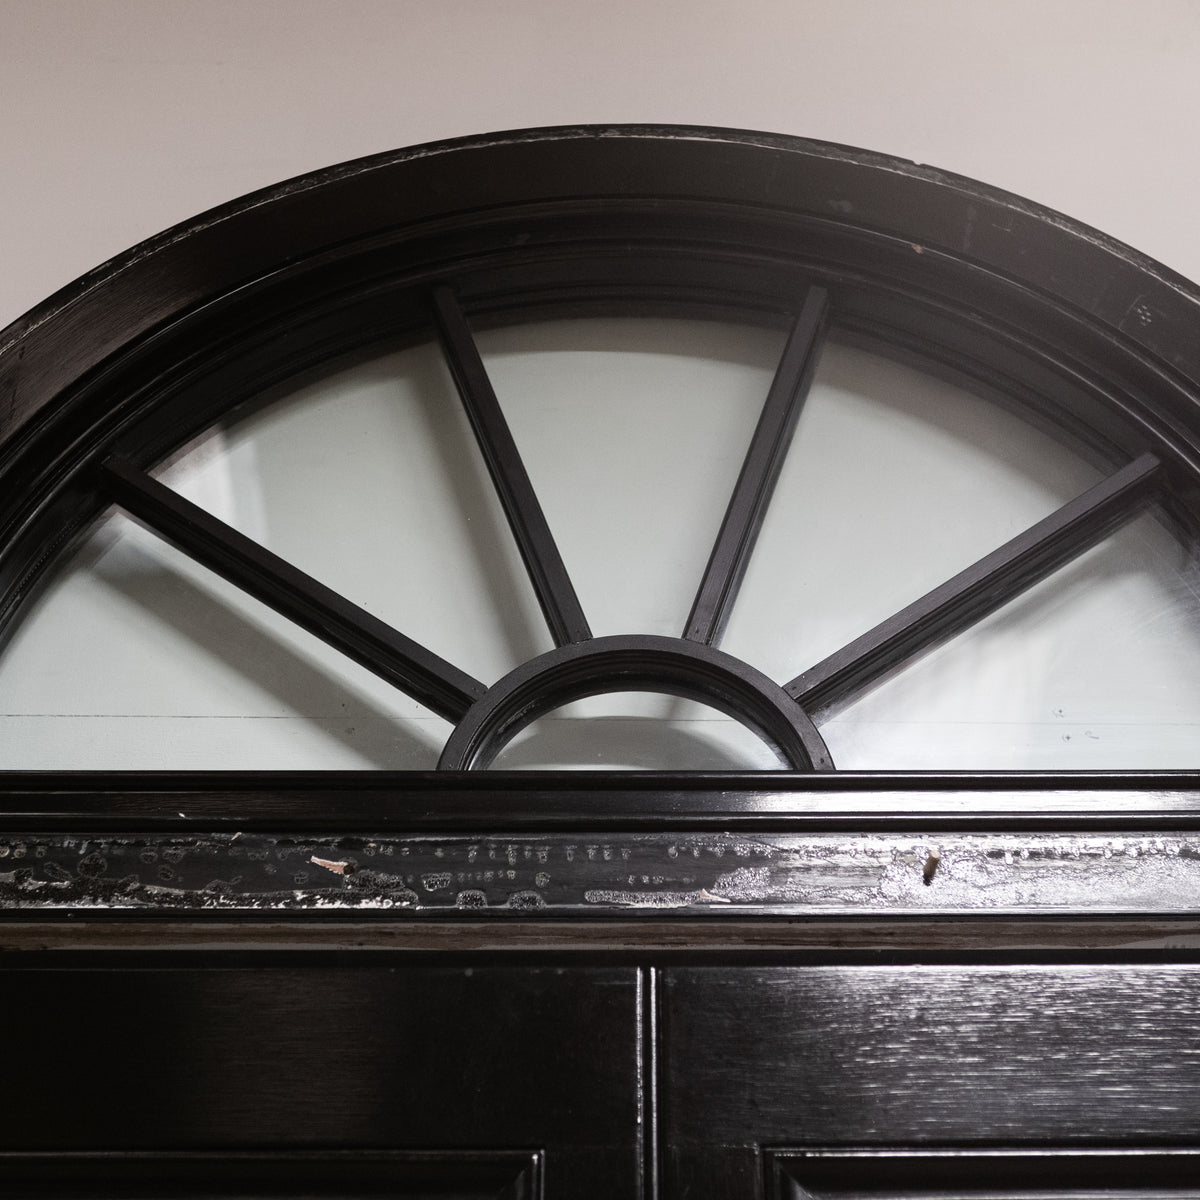 Reclaimed Georgian Style 6 Panel Front Door with Marble Arched Surround &amp; Fan Light | The Architectural Forum